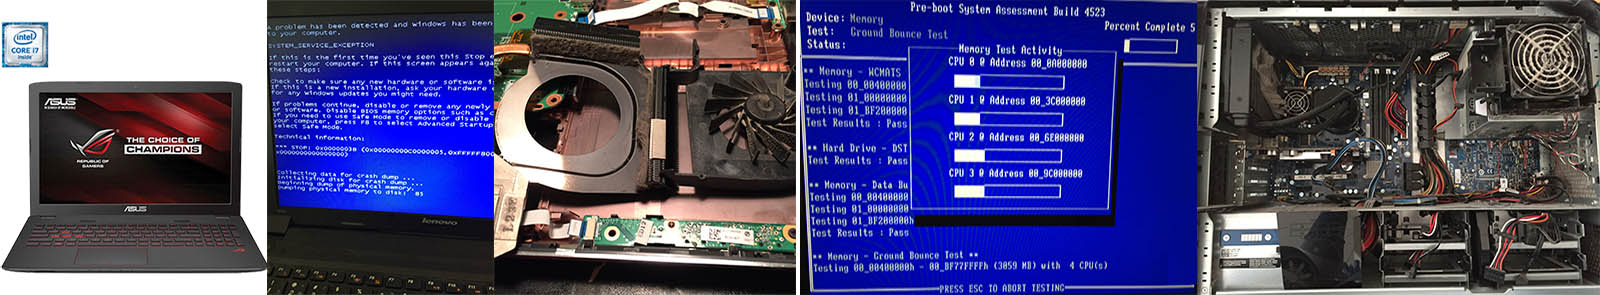 Computer shows a blue screen. Recovery of lost Data. Computer won't boot, partition issues. Security & Data Protection.Network Setup & Troubleshoot.